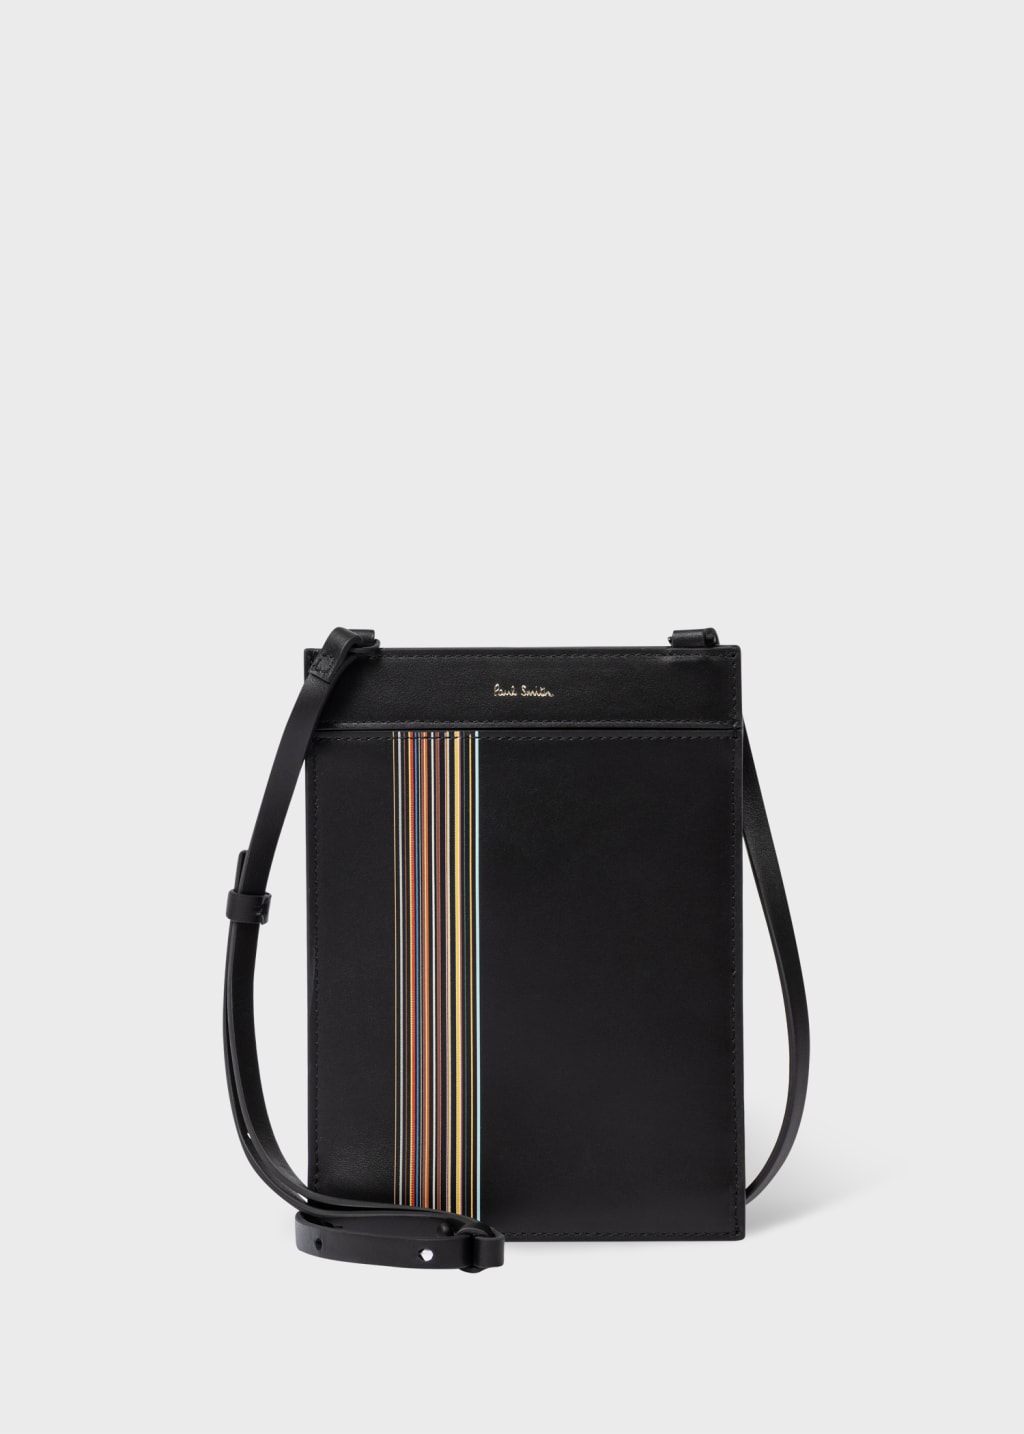 Front View - Black Leather 'Signature Stripe Block' Cross-Body Bag Paul Smith